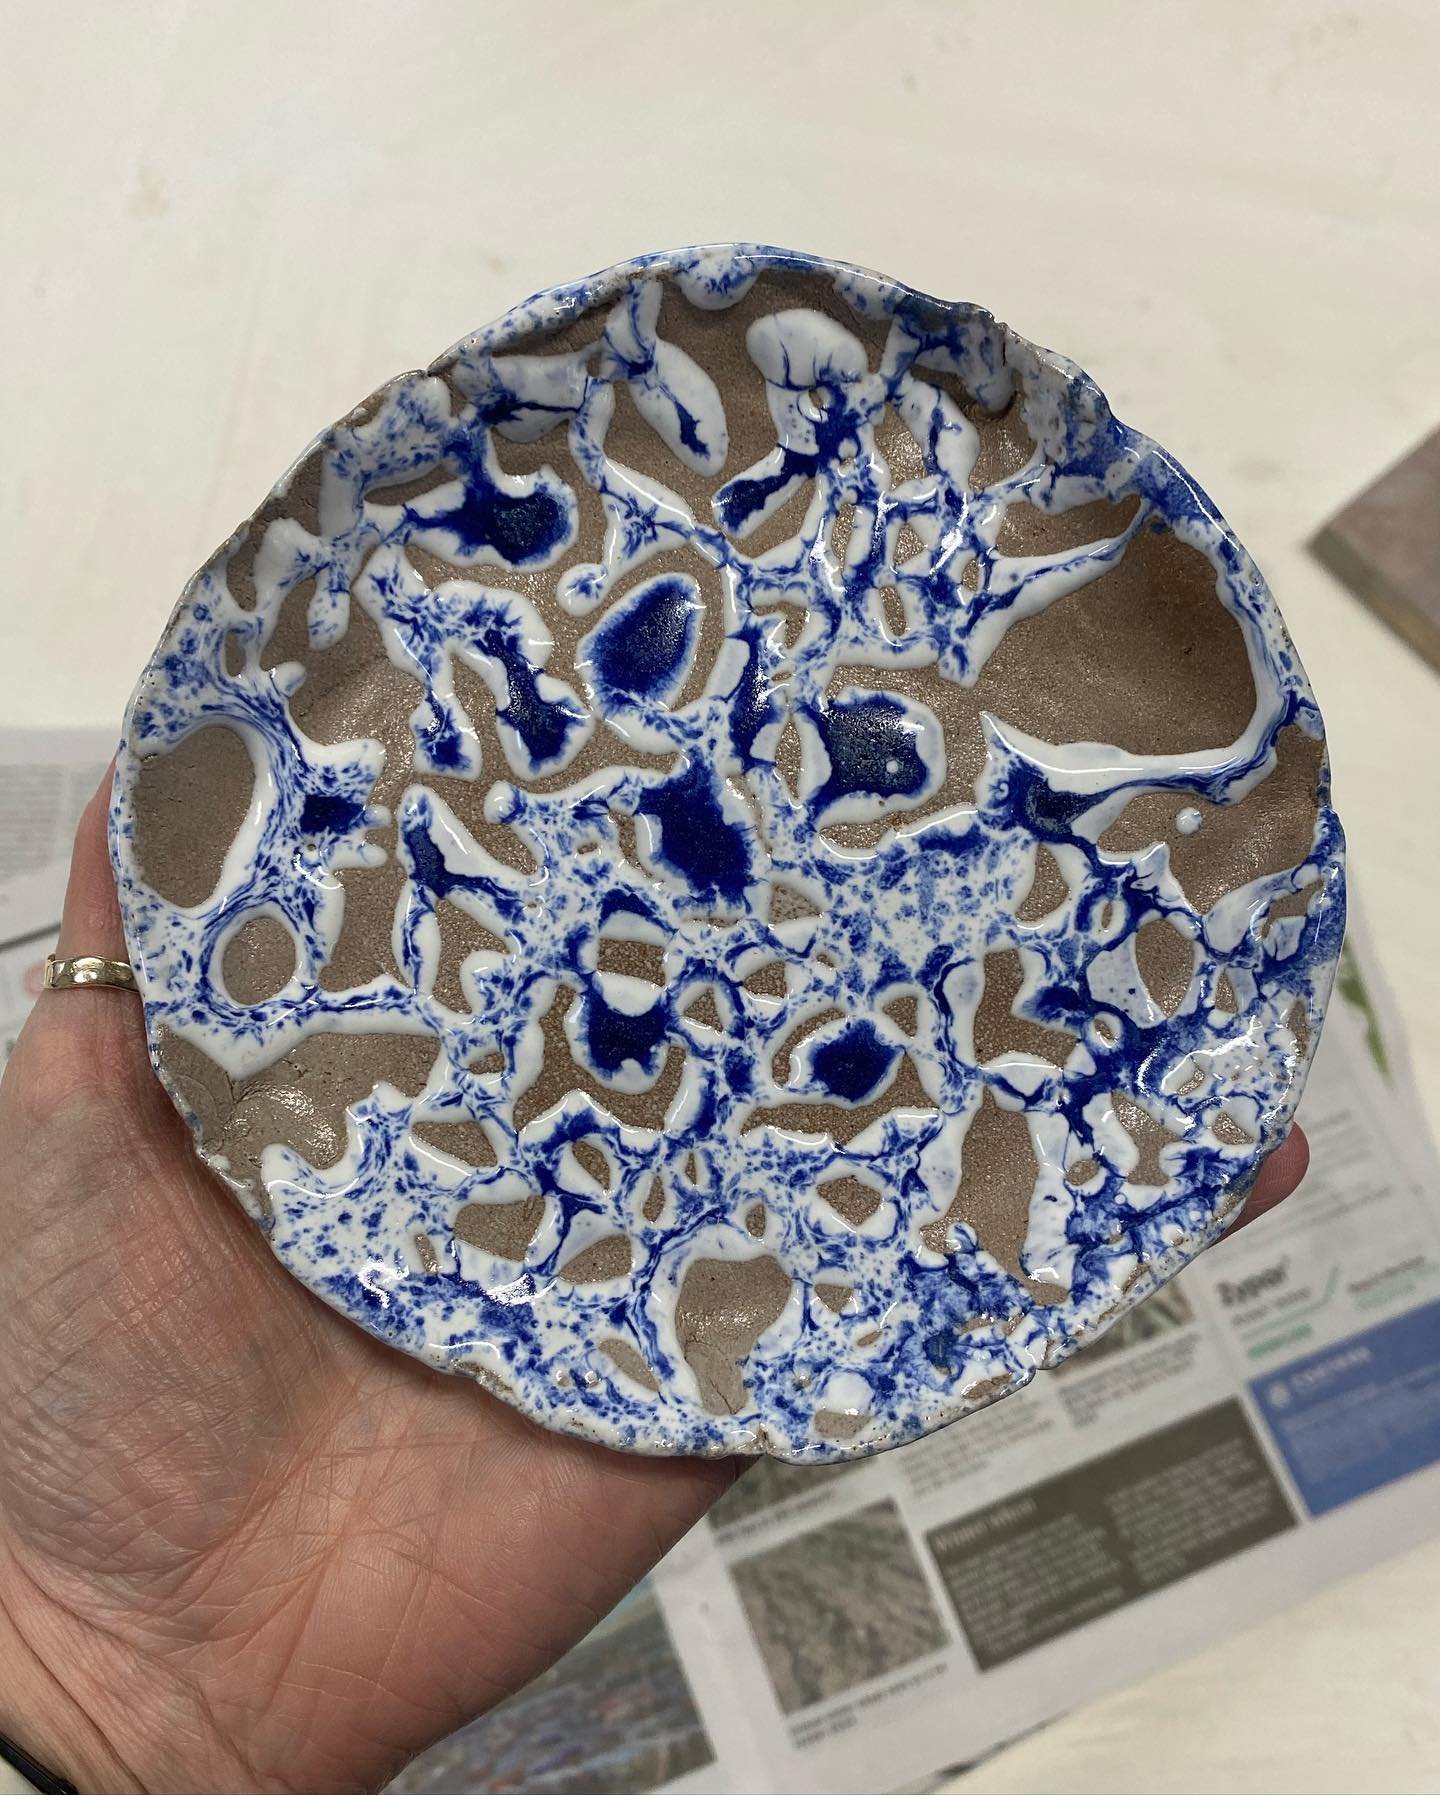 &uarr; Crawling glaze &uarr;
Glaze applied to thick can melt in lumps during the firing, exposing the clay, total accident but quite like it 🍋
Image 1: Fired piece 
Image 2: Glaze applied pre firing